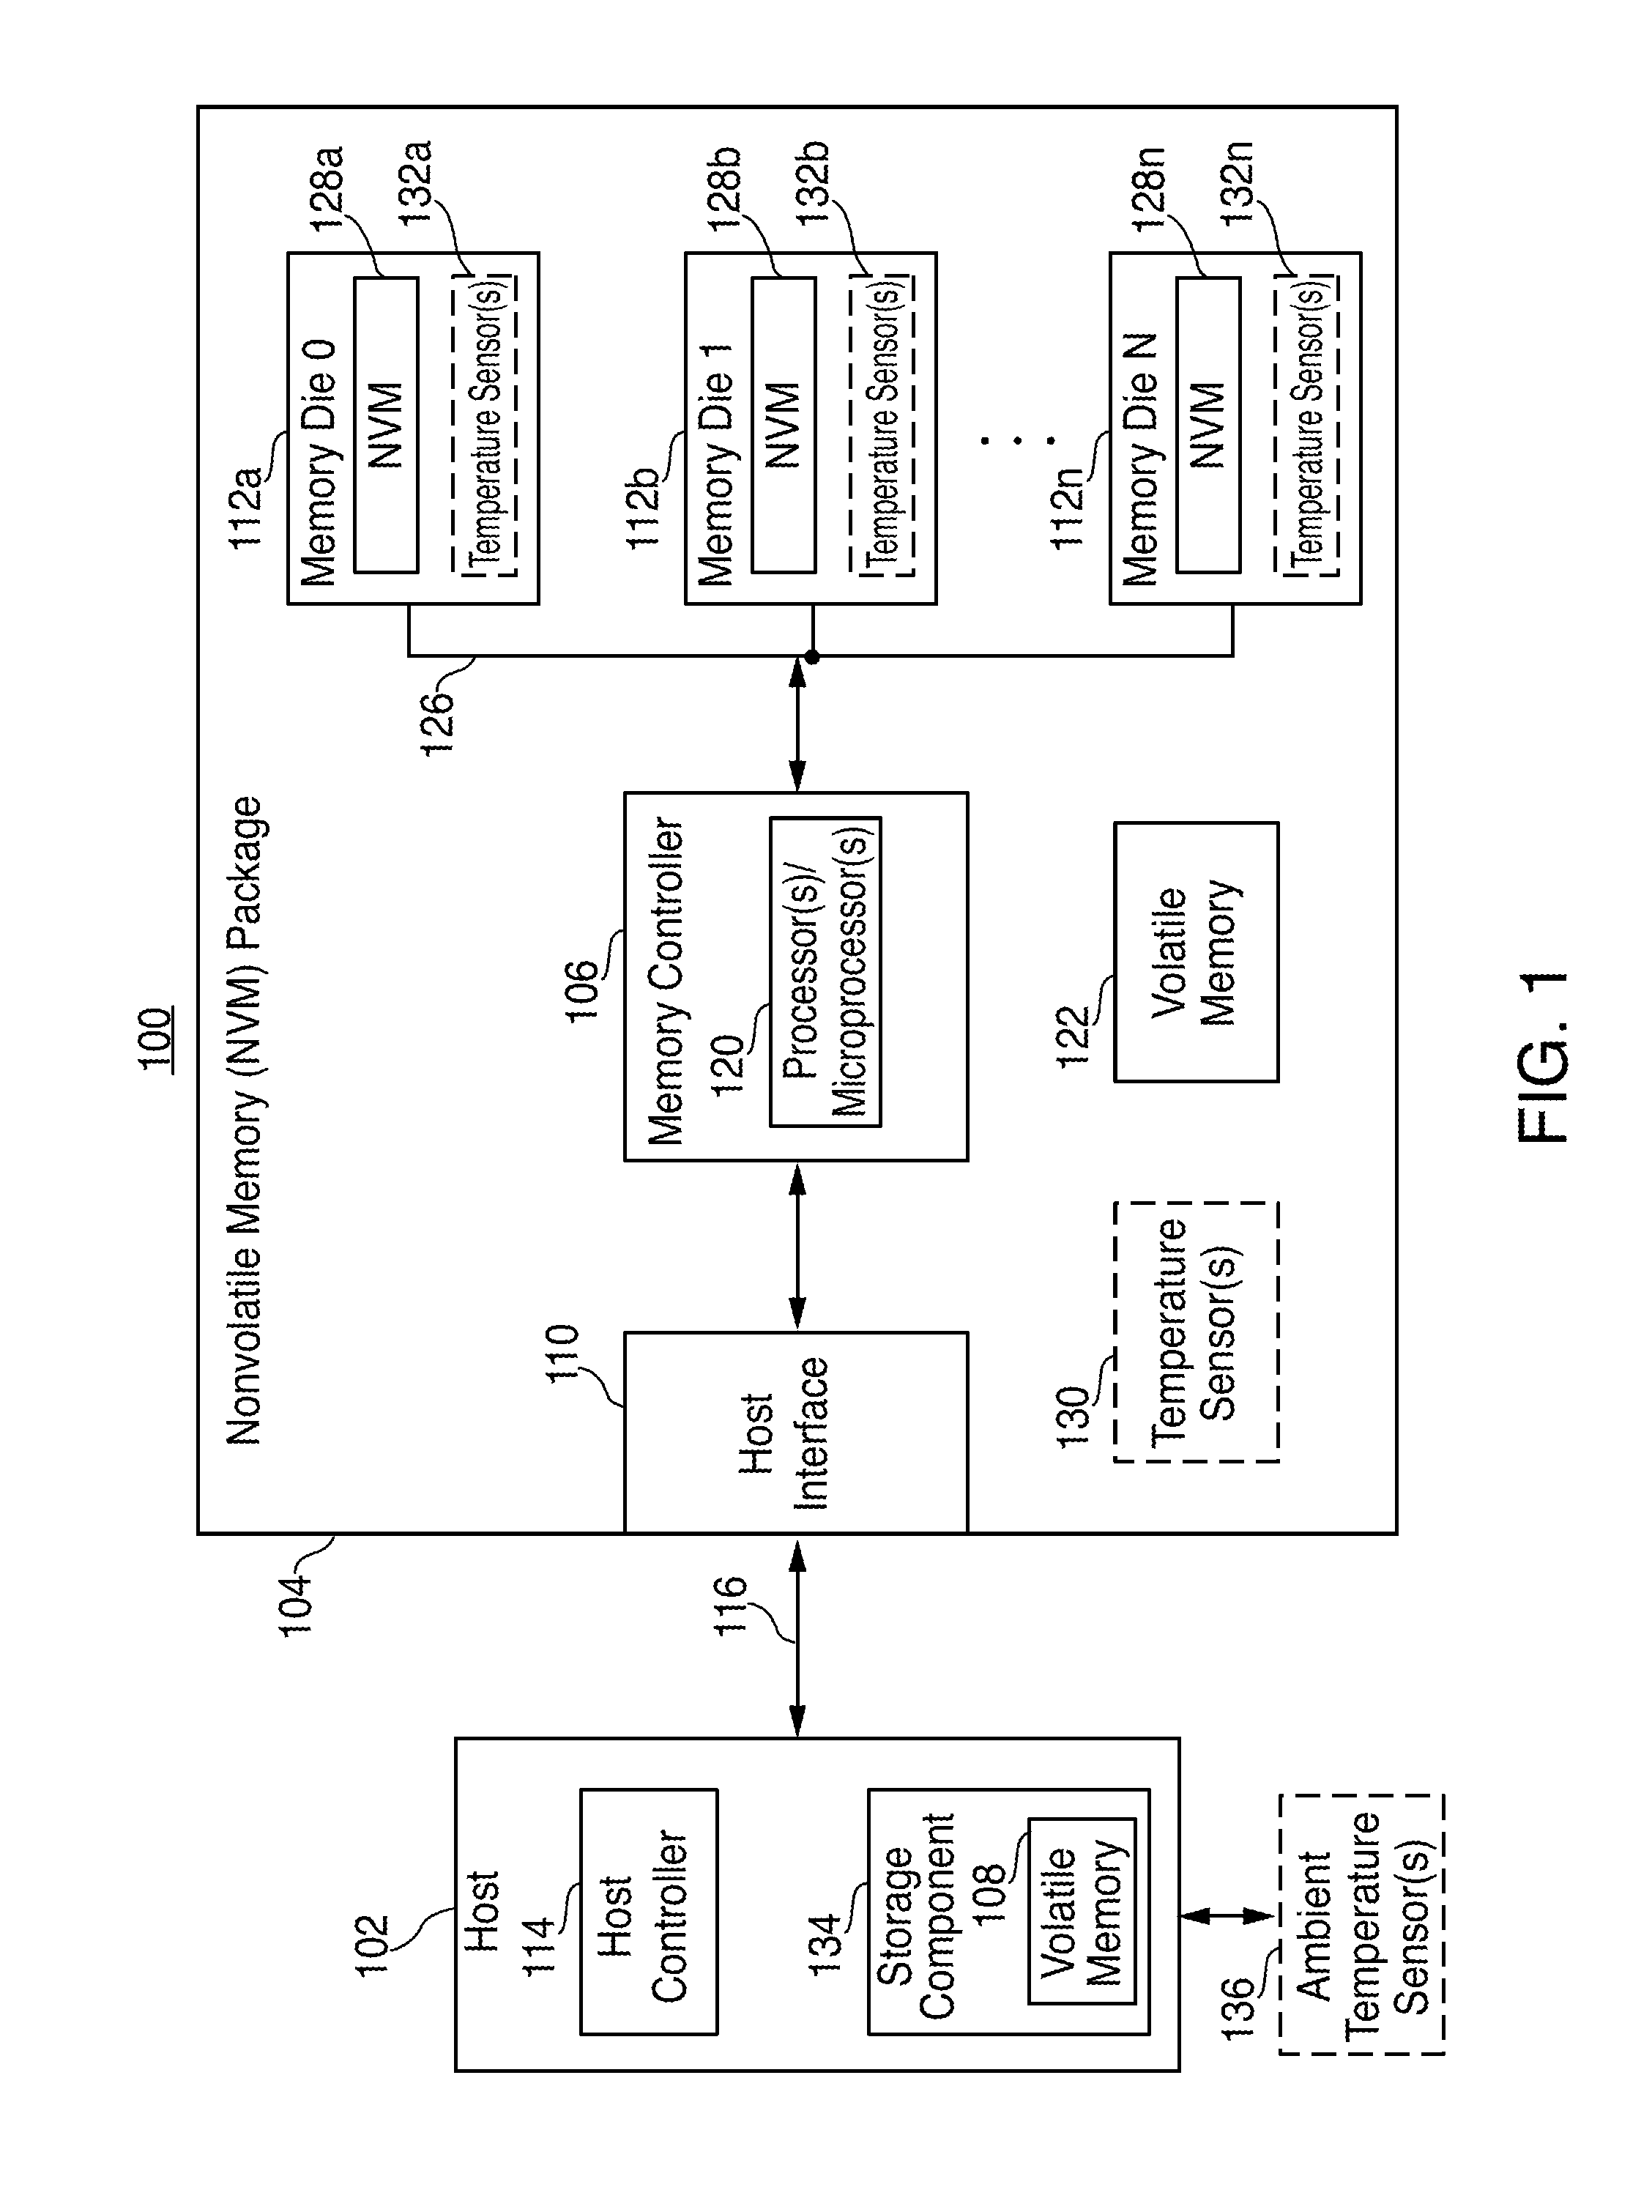 Systems and methods for nonvolatile memory performance throttling